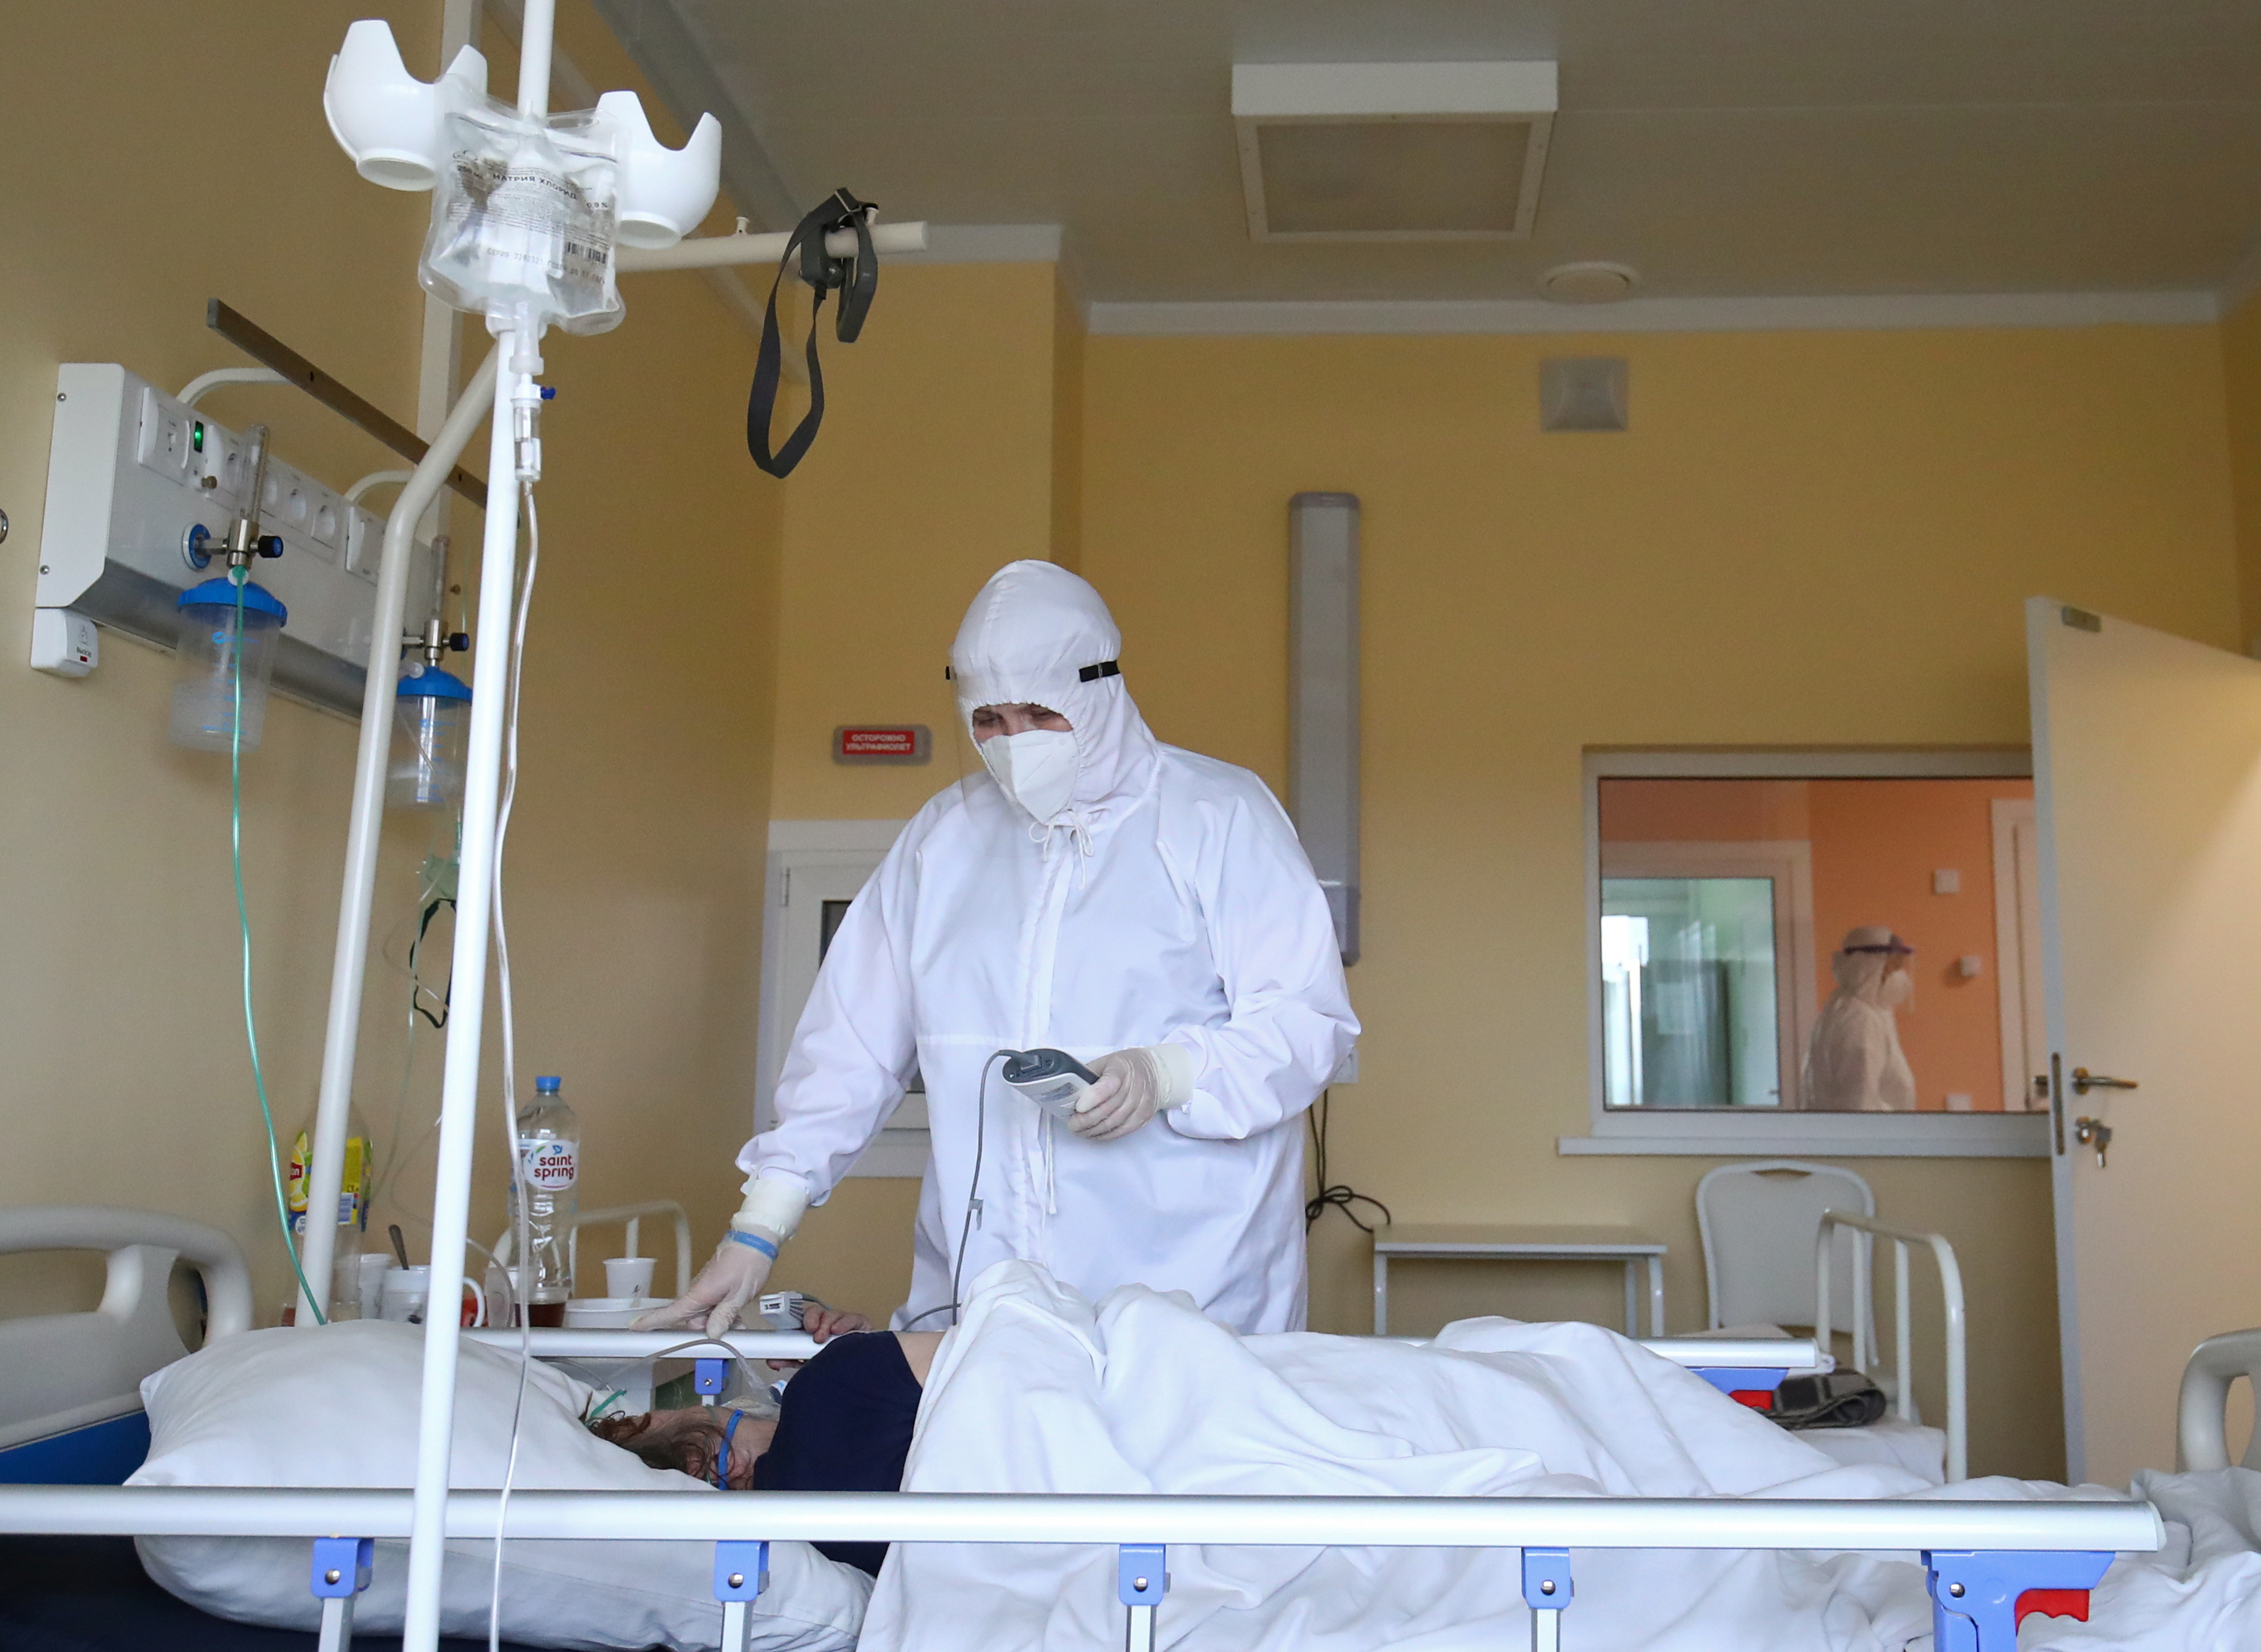 A medical specialist tends to a patient suffering from the coronavirus disease (COVID-19) at a local hospital in the town of Kalach-on-Don in Volgograd Region, Russia November 14, 2021. REUTERS/Kirill Braga